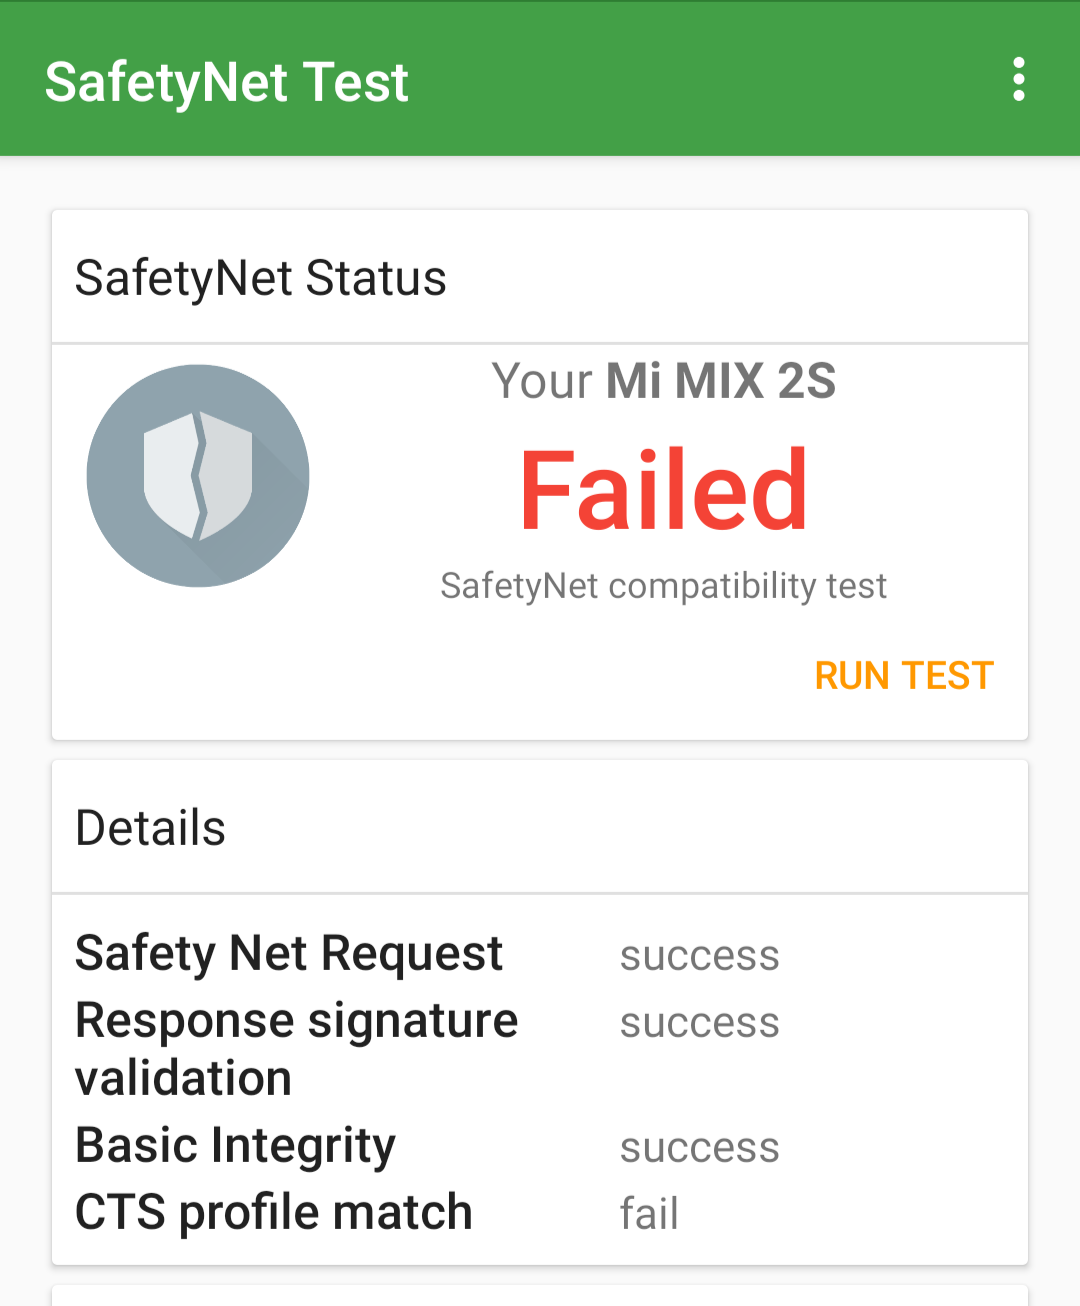 Screenshot_2019-04-18-10-59-07-089_org.freeandroidtools.safetynettest.png